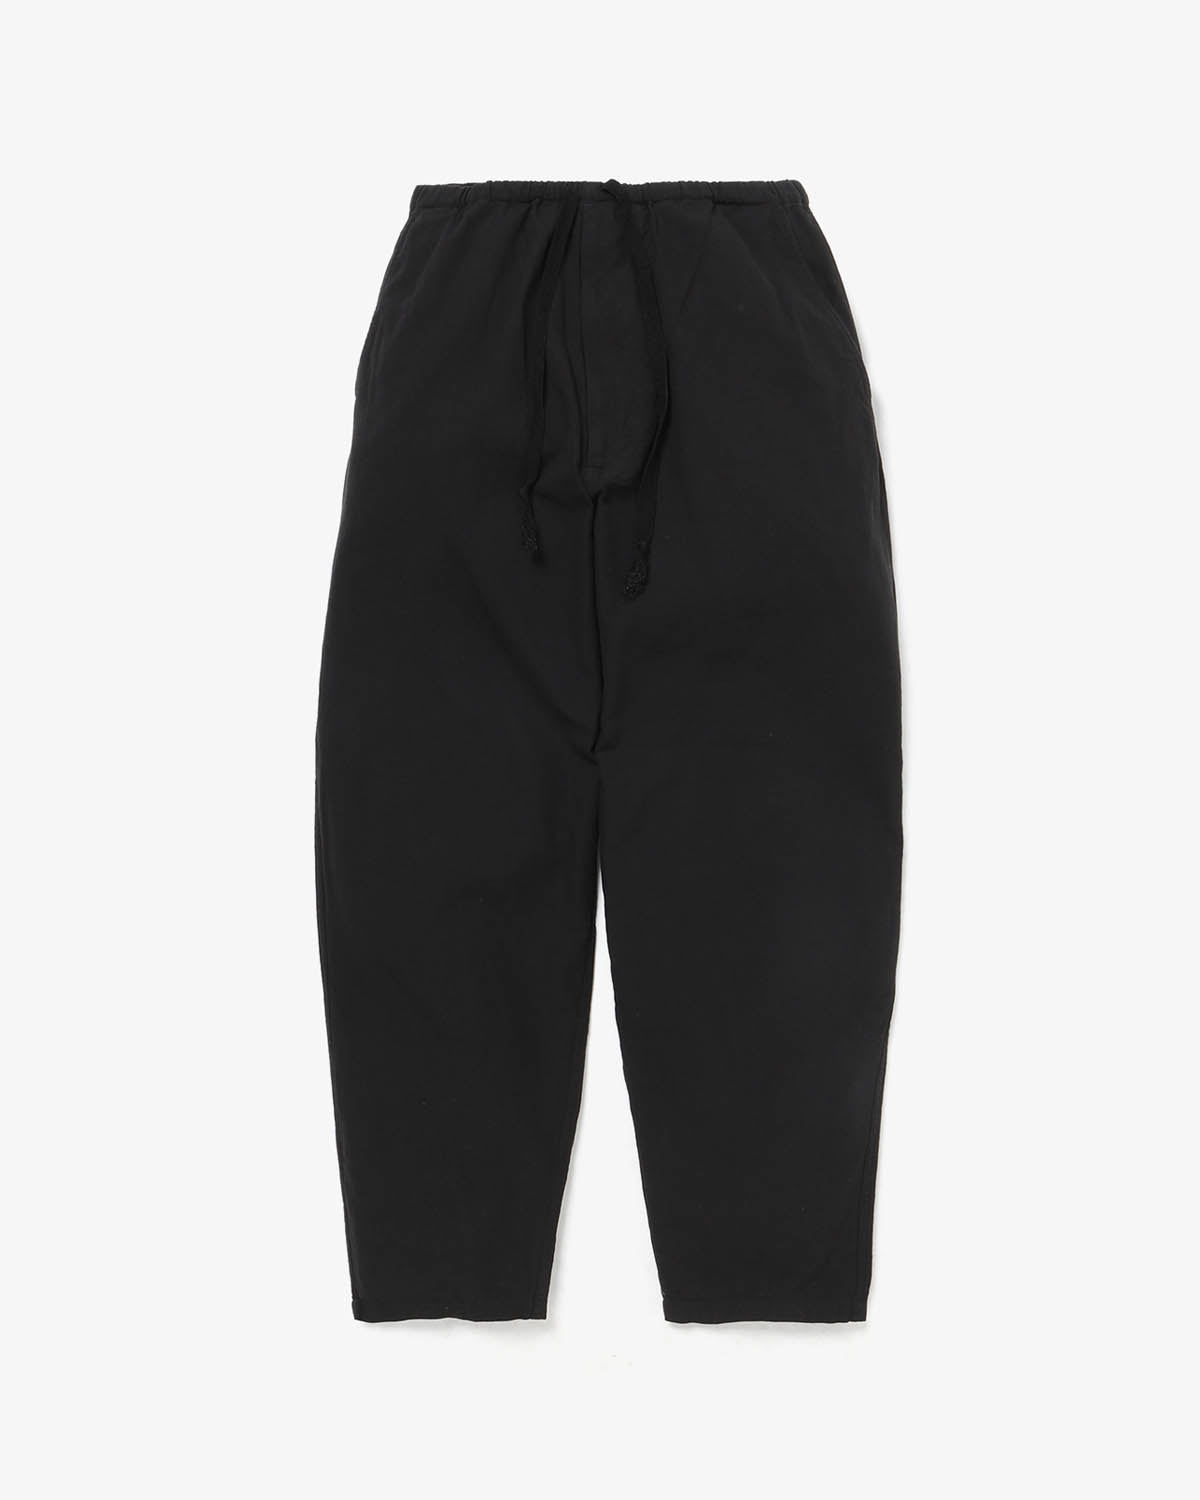 COTTON DUCK TAPERED PANTS